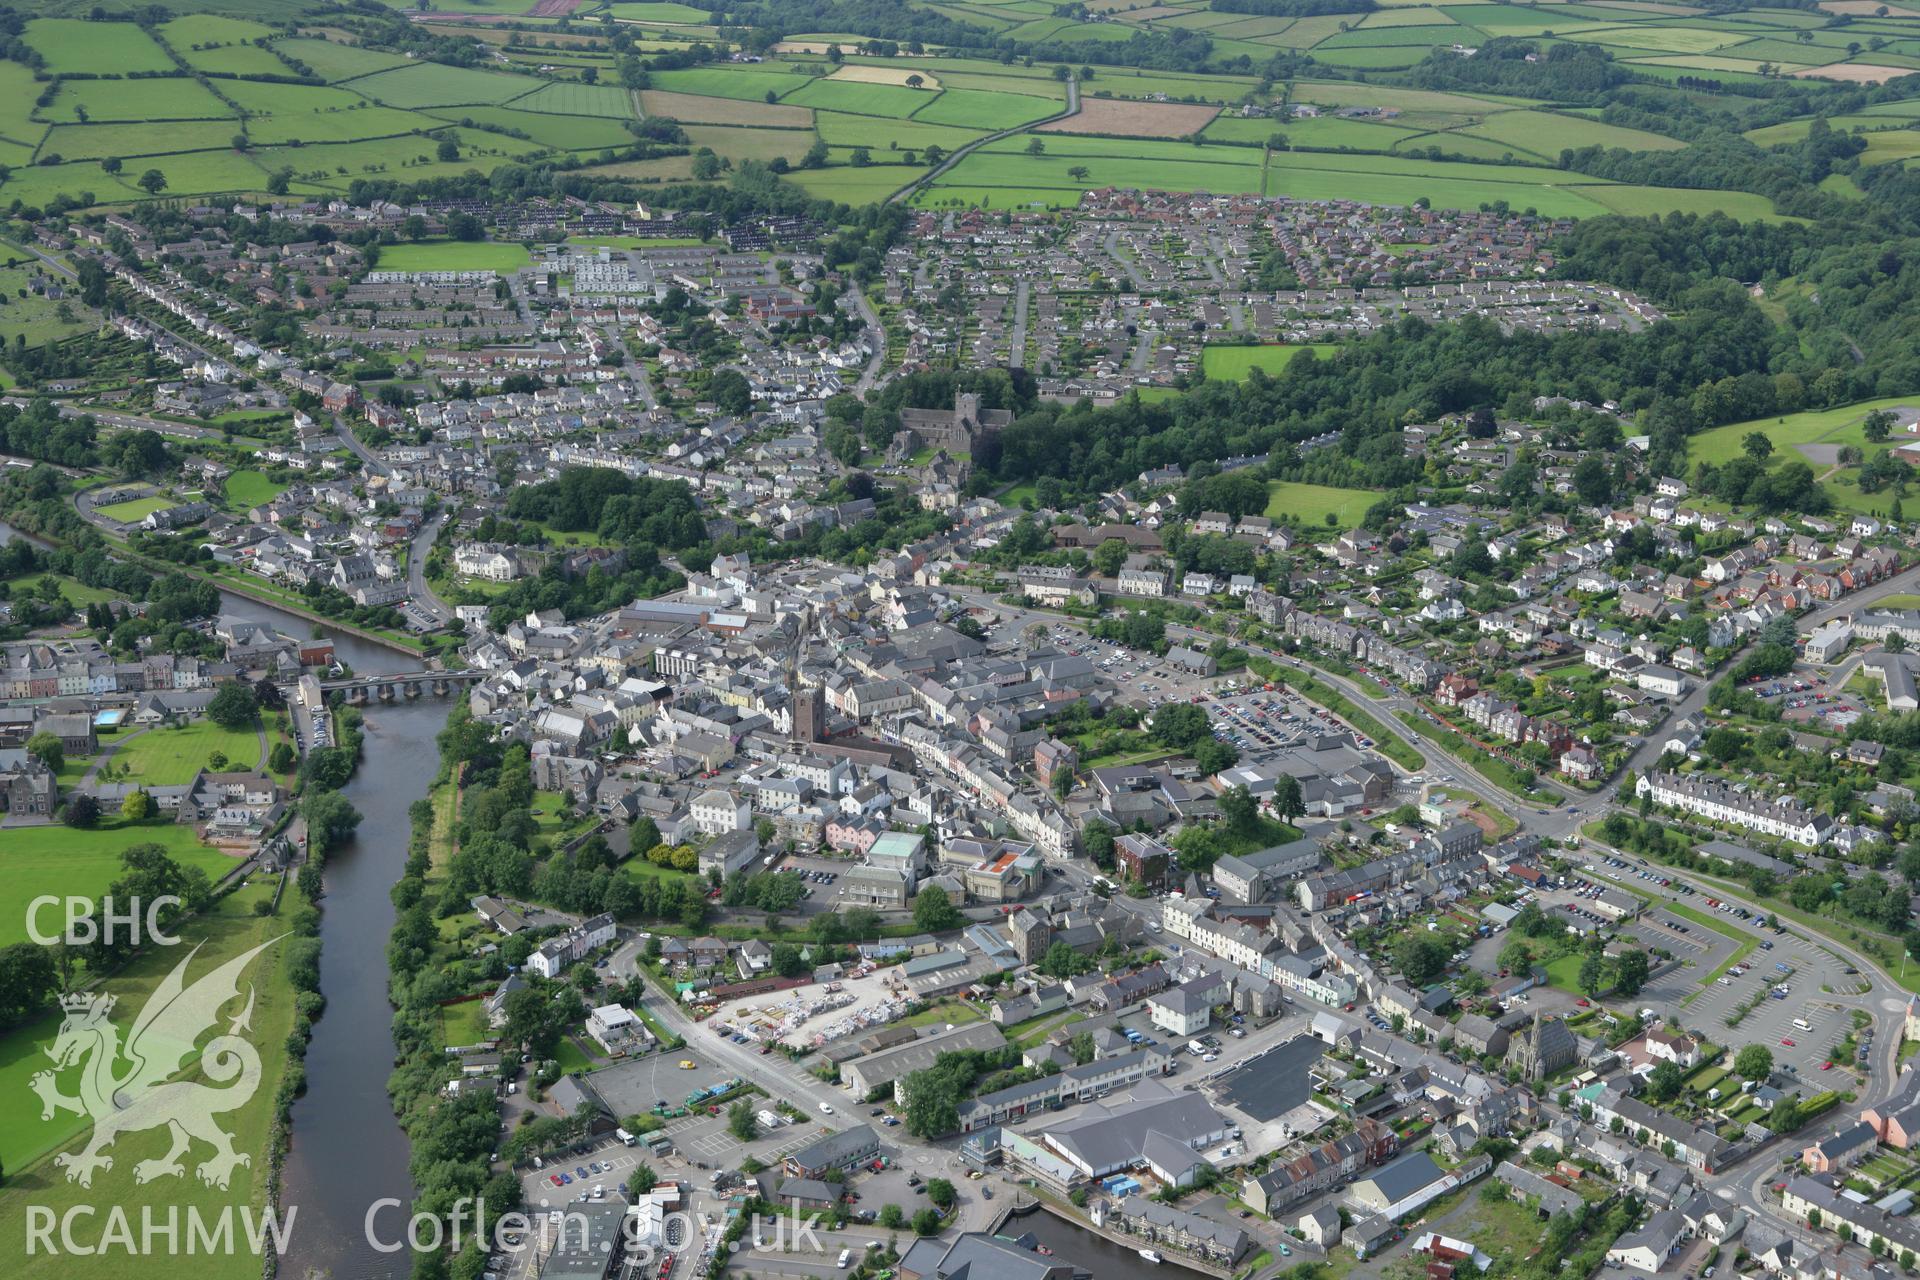 RCAHMW colour oblique aerial photograph of Brecon. Taken on 09 July 2007 by Toby Driver